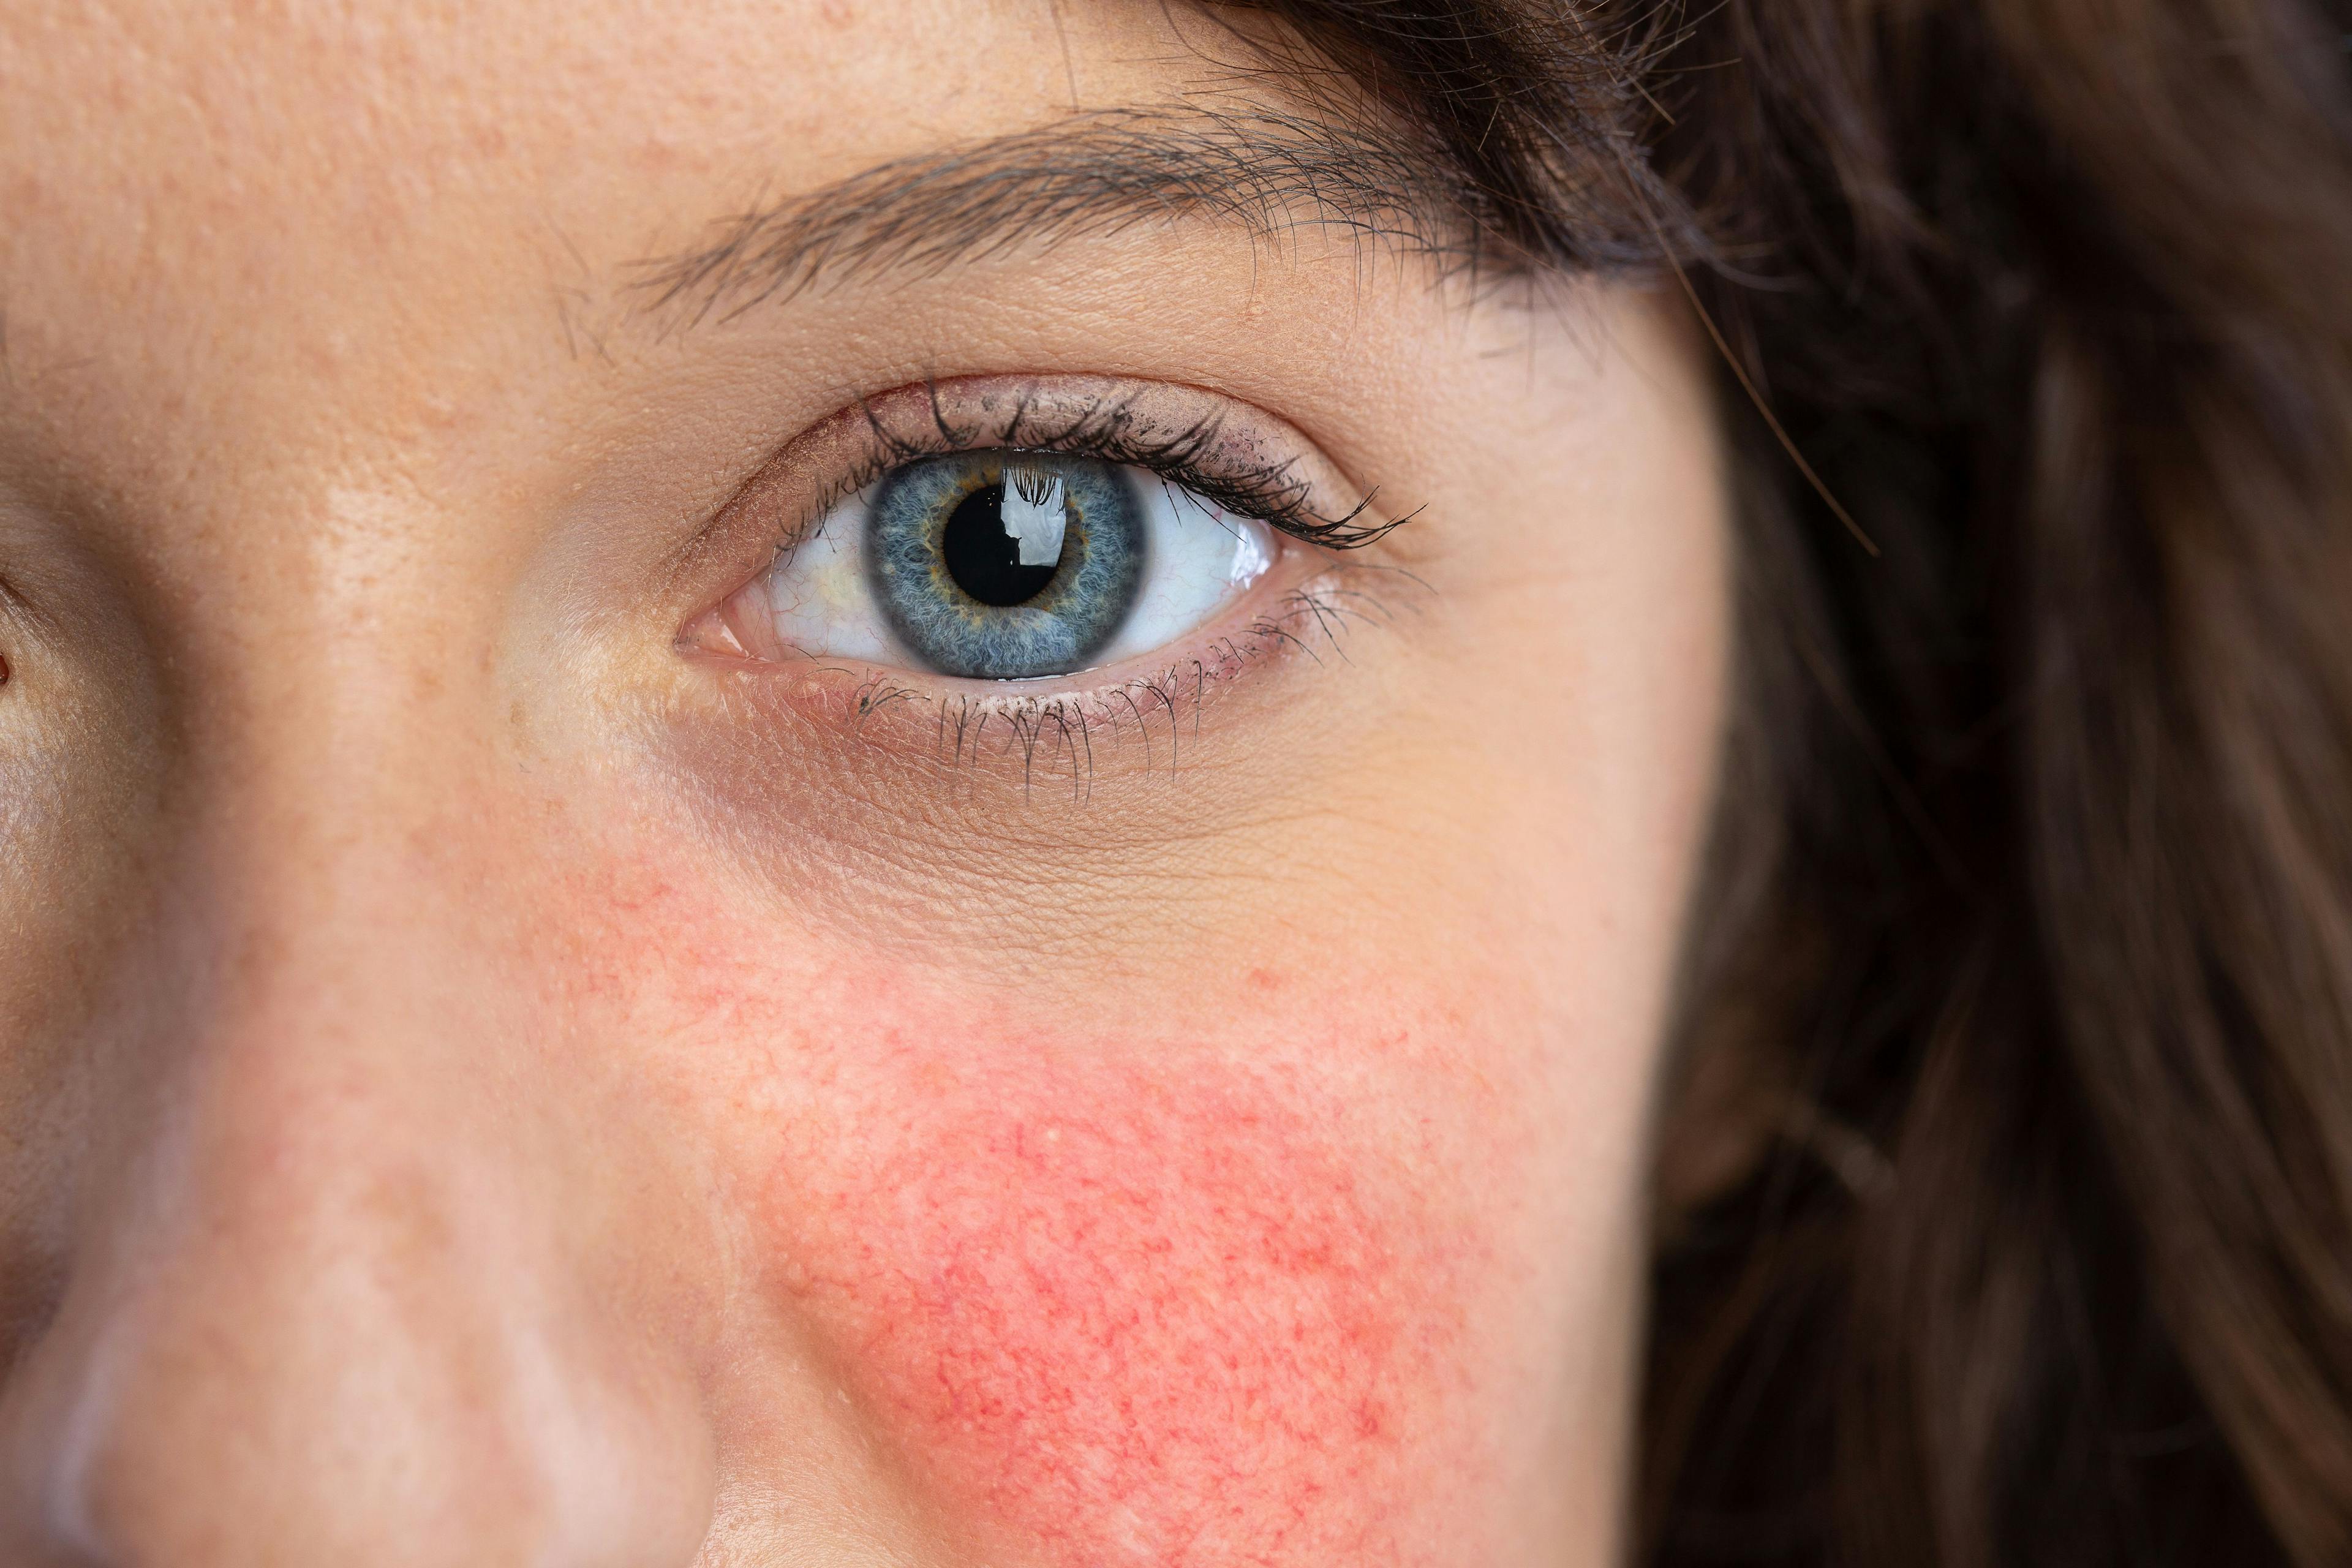 Using Combination Therapies and Avoiding Subtypes for Rosacea